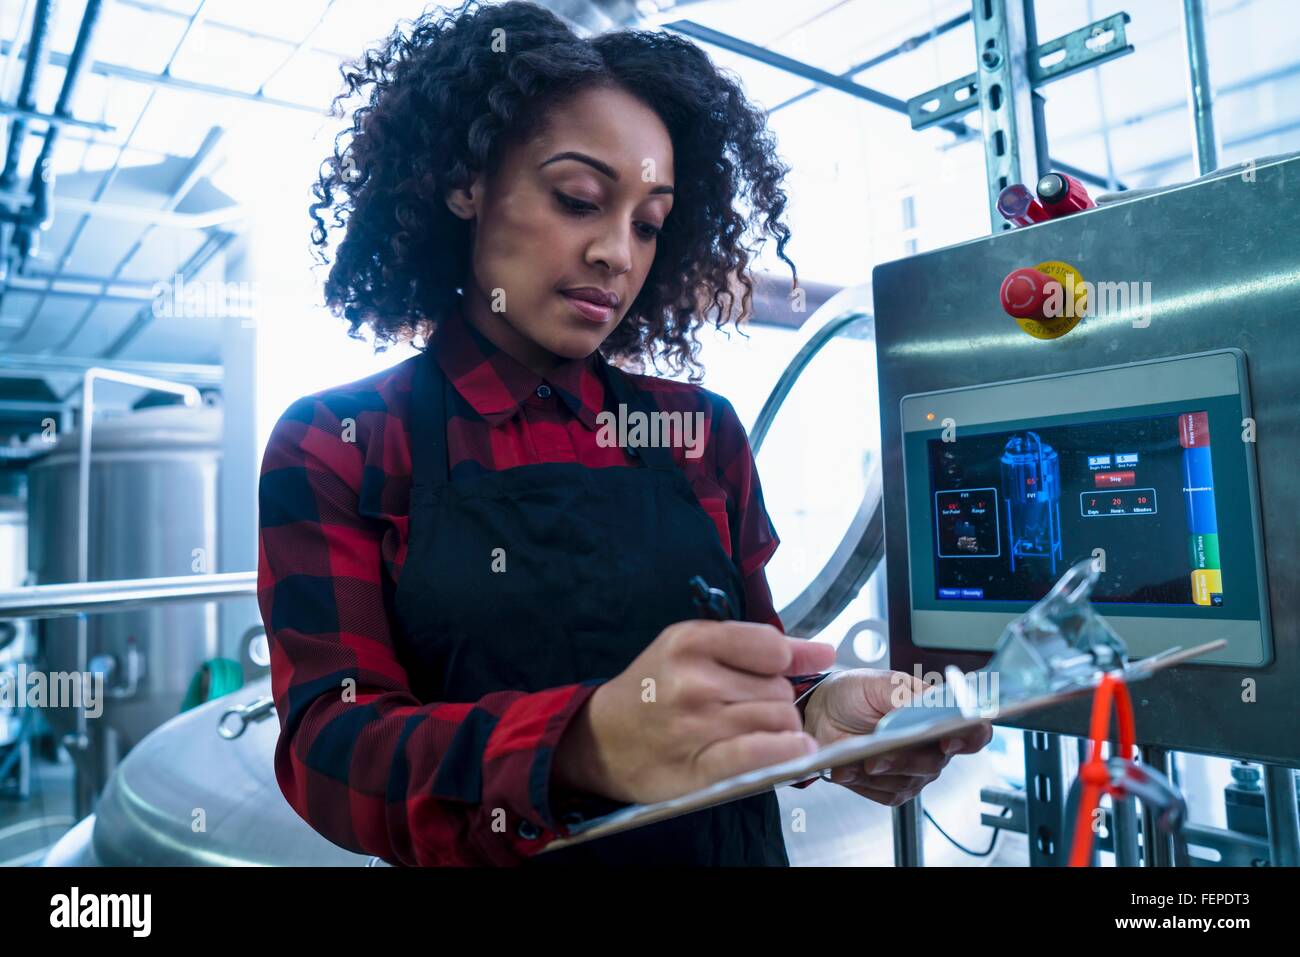 Mid adult woman in brewery monitoring computer equipment, looking down writing on clipboard Stock Photo